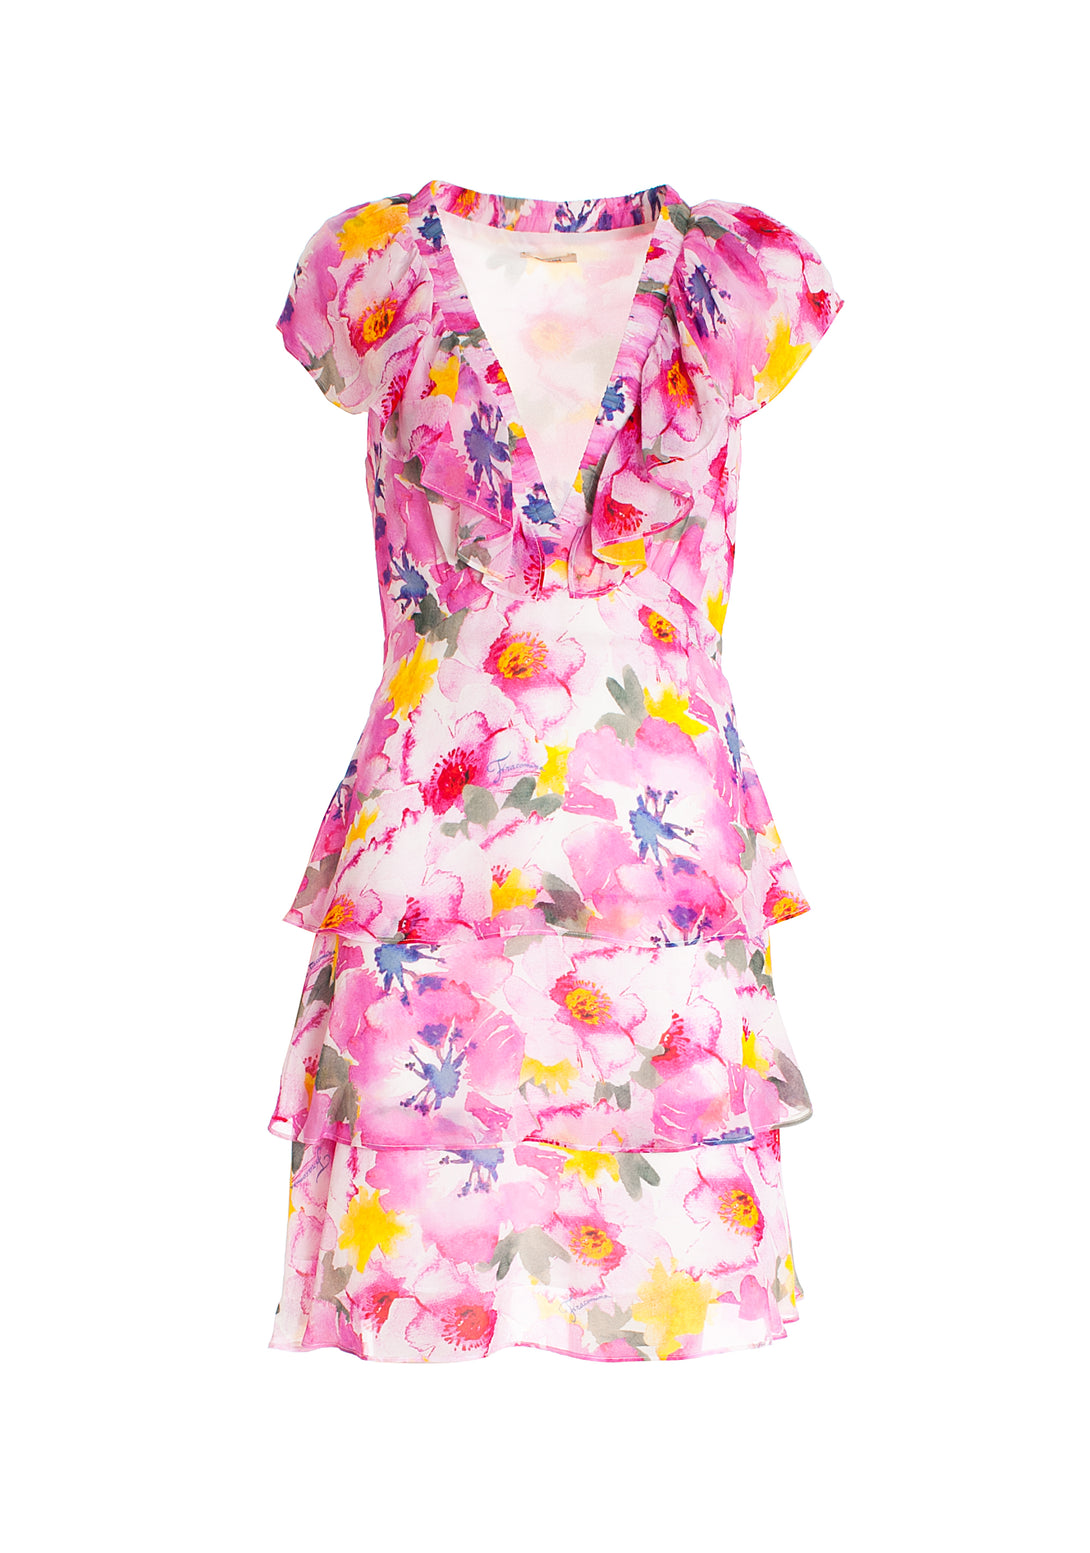 Mini dress with flowery pattern and no sleeves